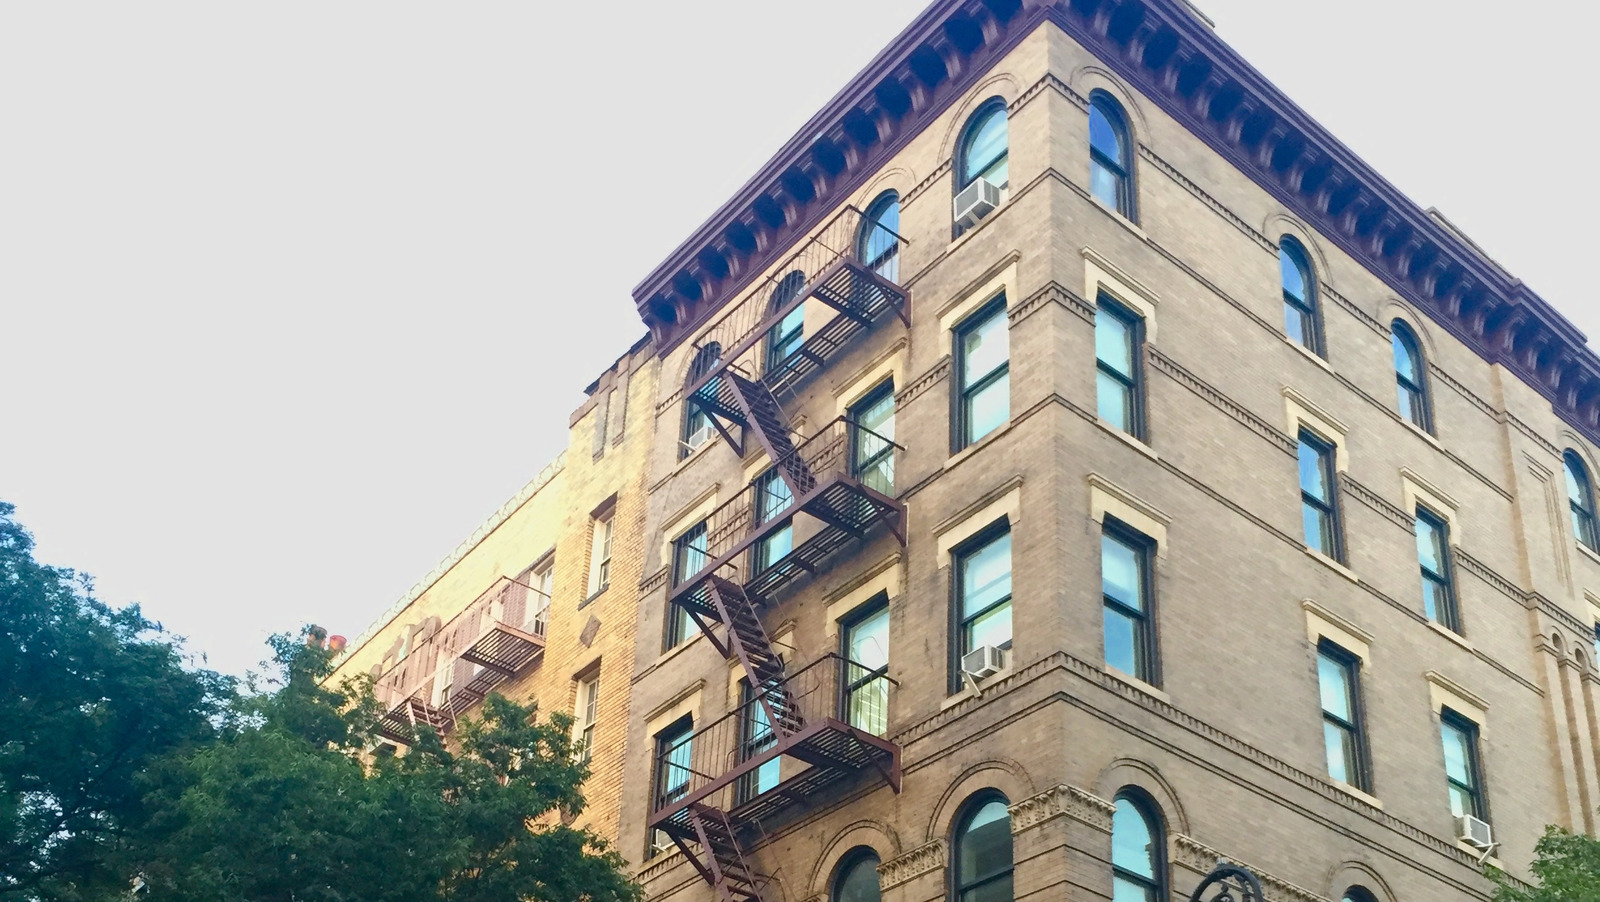 The Location of The Friends Apartment Building in New York City